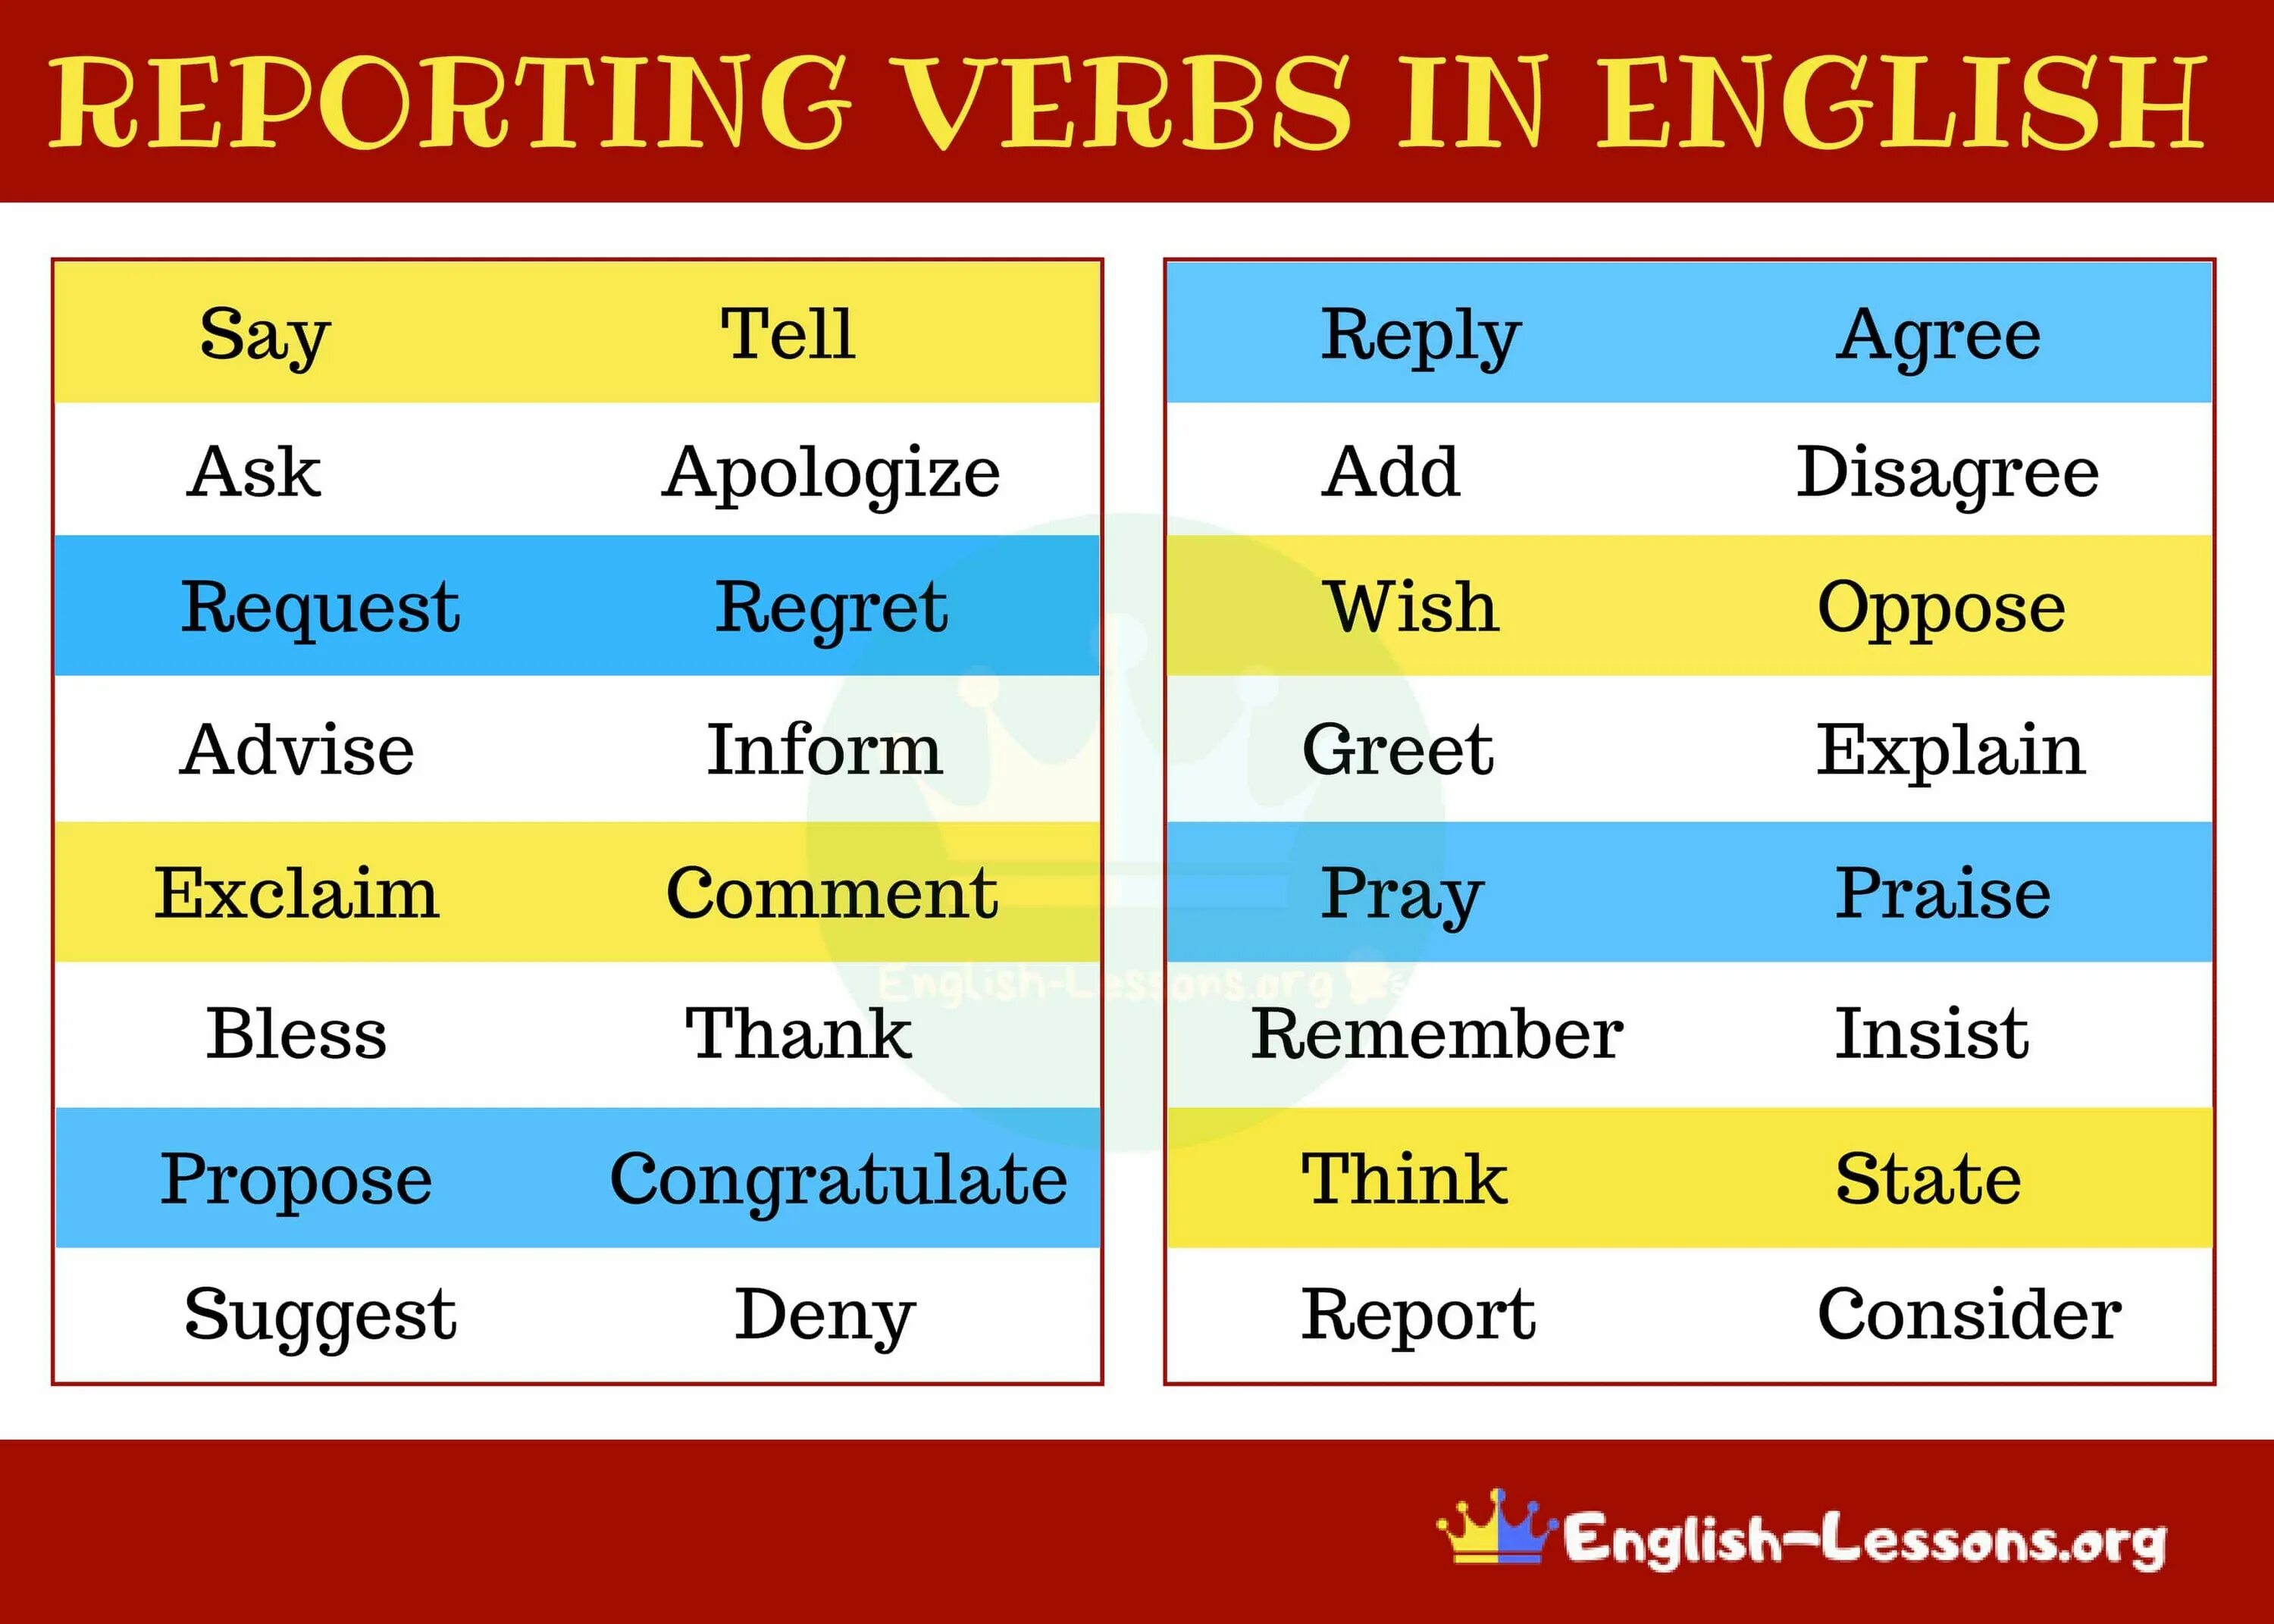 Reporting verbs. Reporting verbs в английском языке. Reporting verbs список. Reporting verbs list. Rewrite using reporting verbs